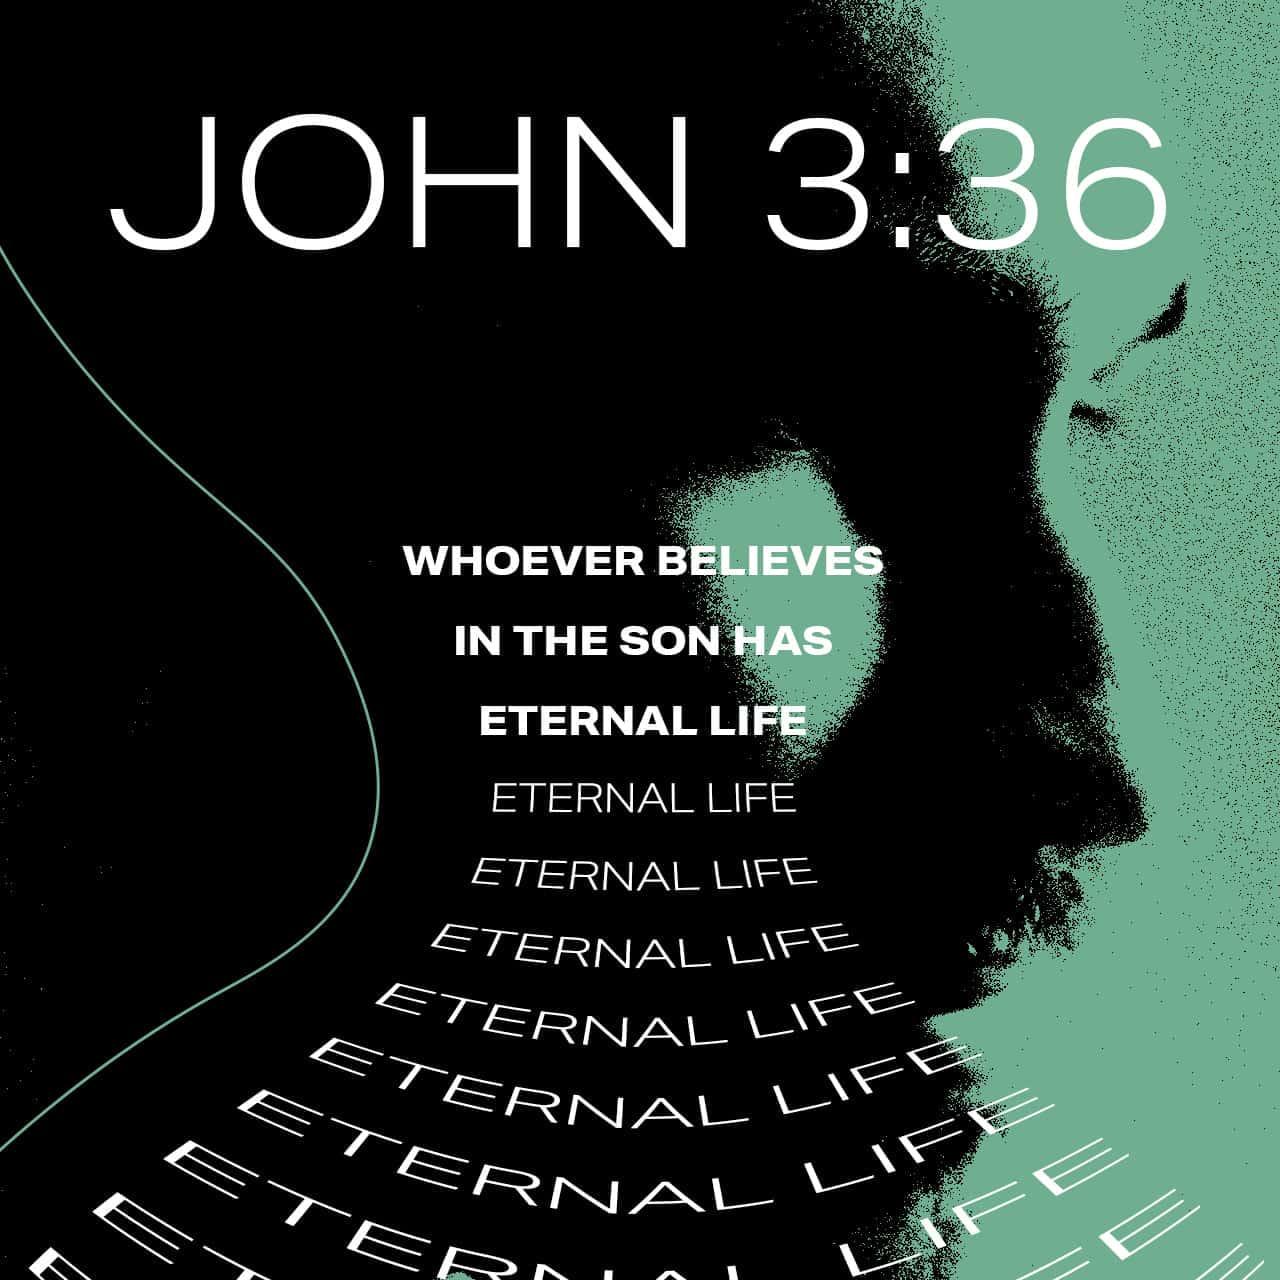 Bible Verse of the Day - day 154 - image 56522 (John 3:22-36)